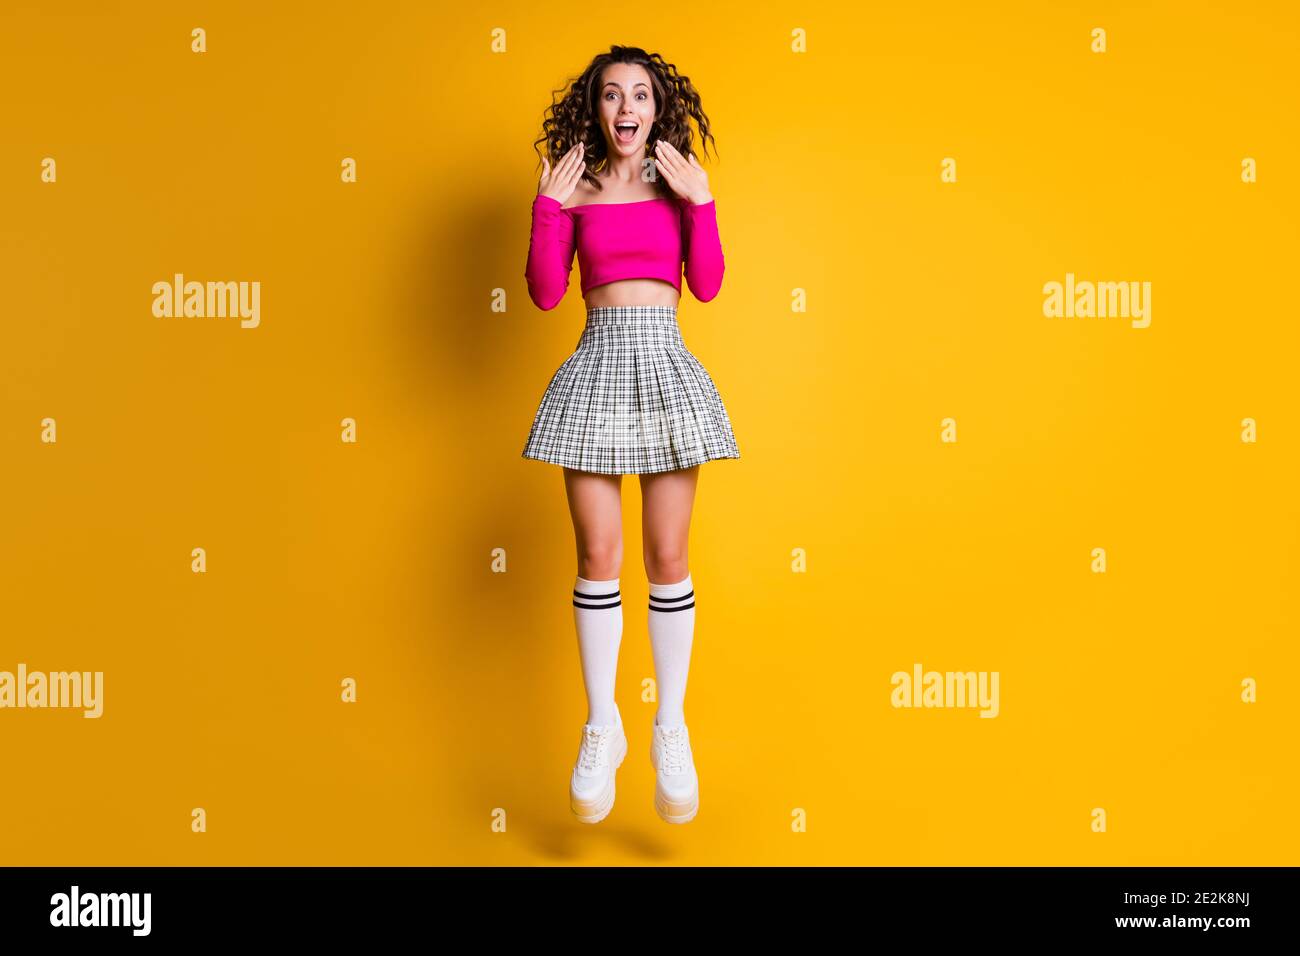 Photo portrait of girl jumping screaming hands near face wearing fuchsia crop-top checkered skirt knee-high socks white sneakers isolated on bright Stock Photo